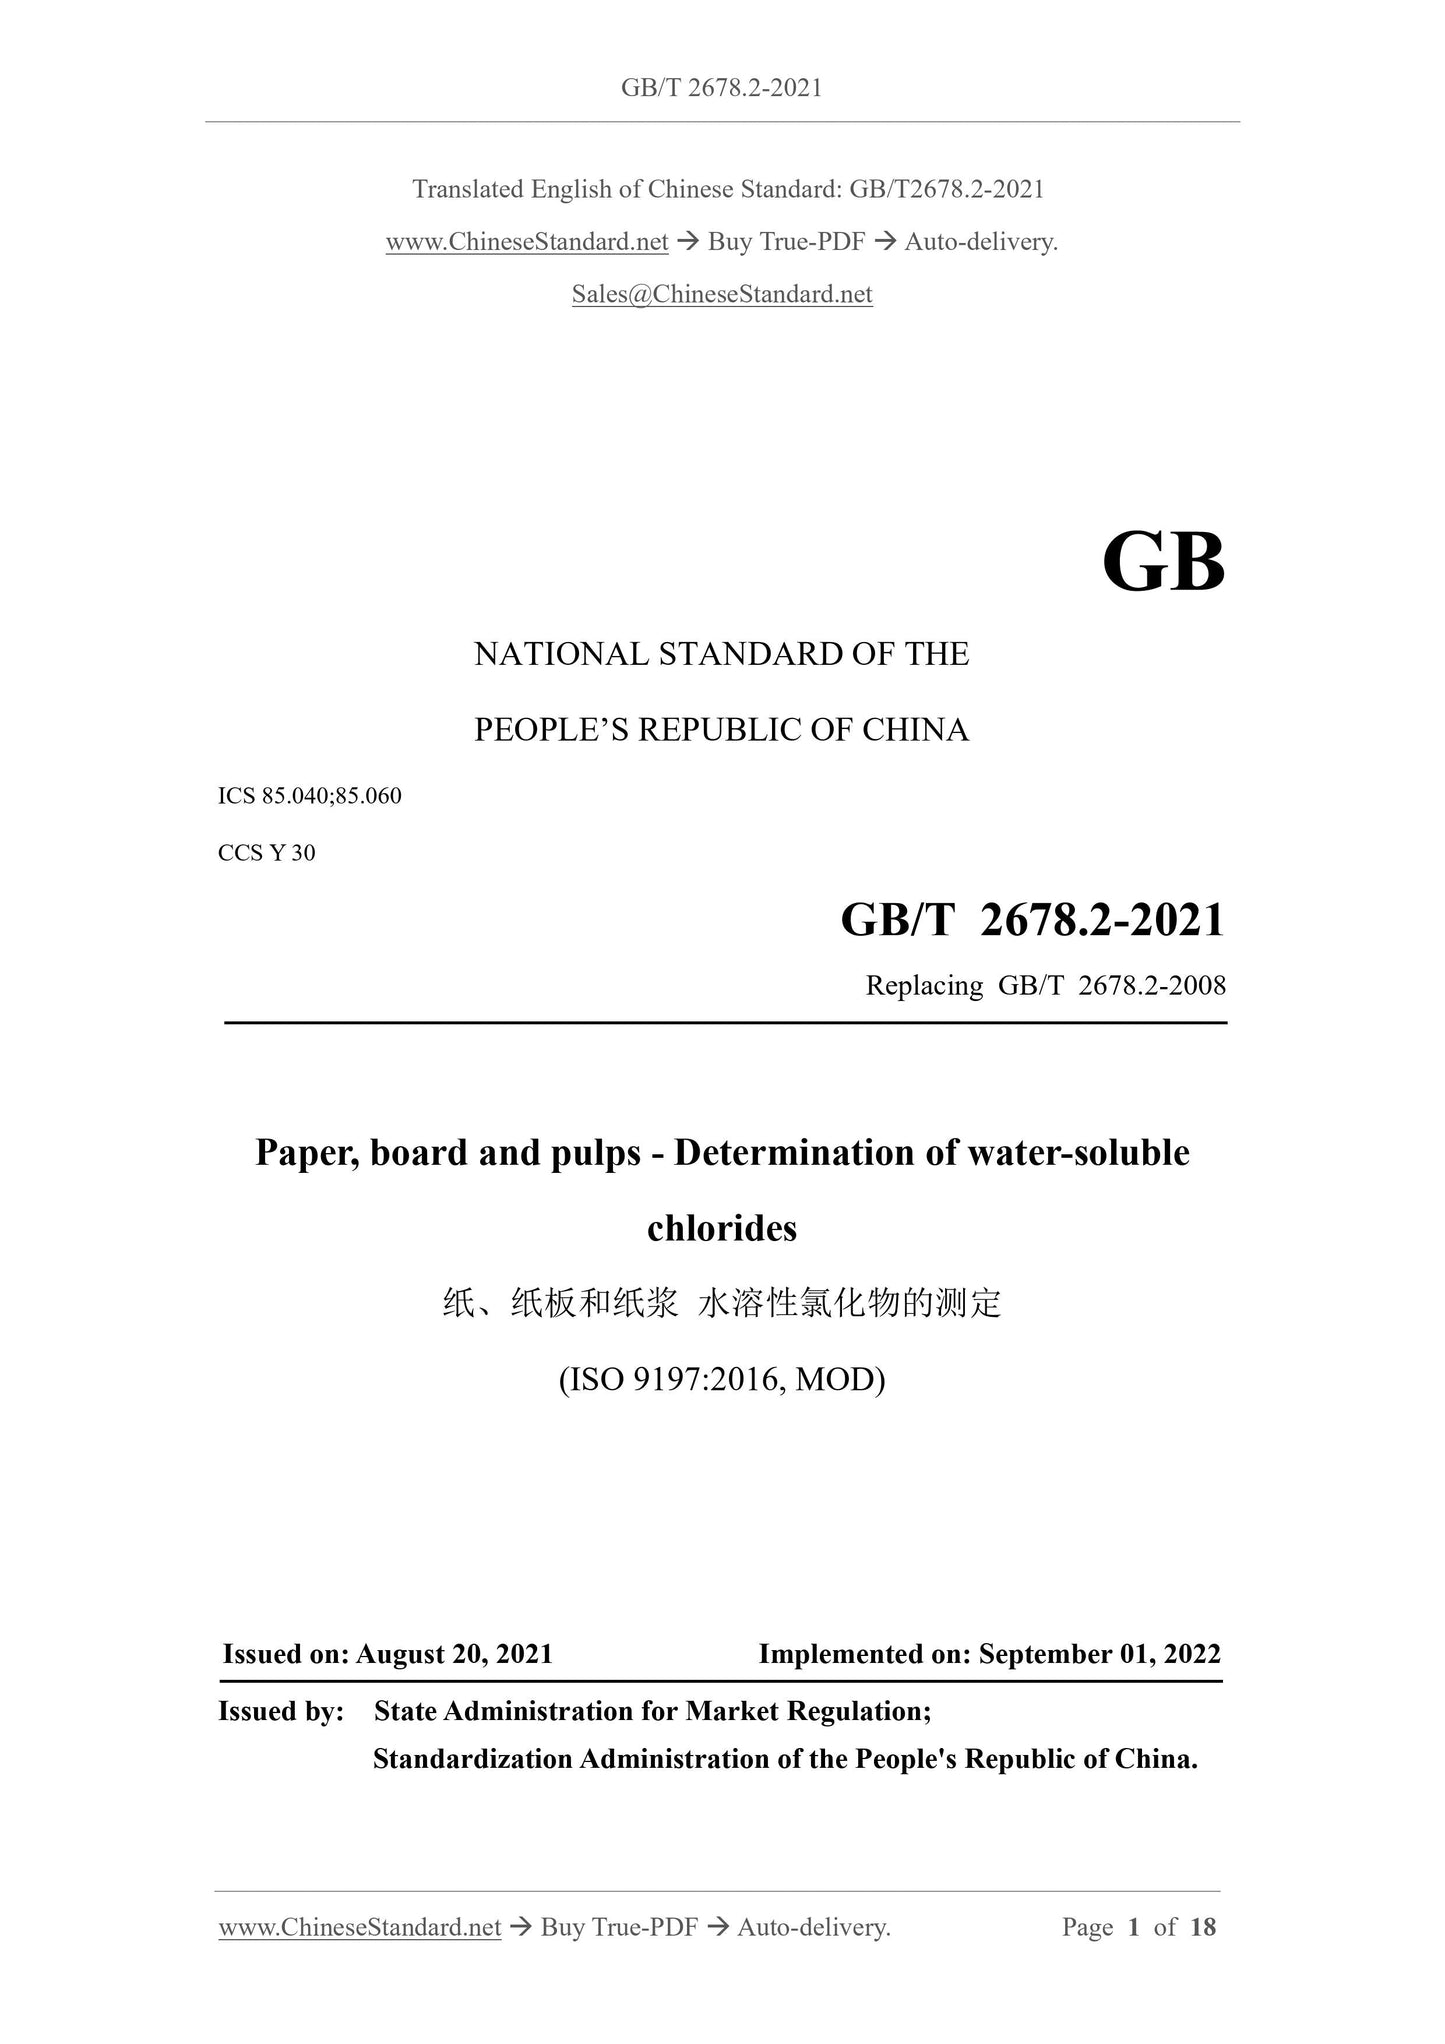 GB/T 2678.2-2021 Page 1